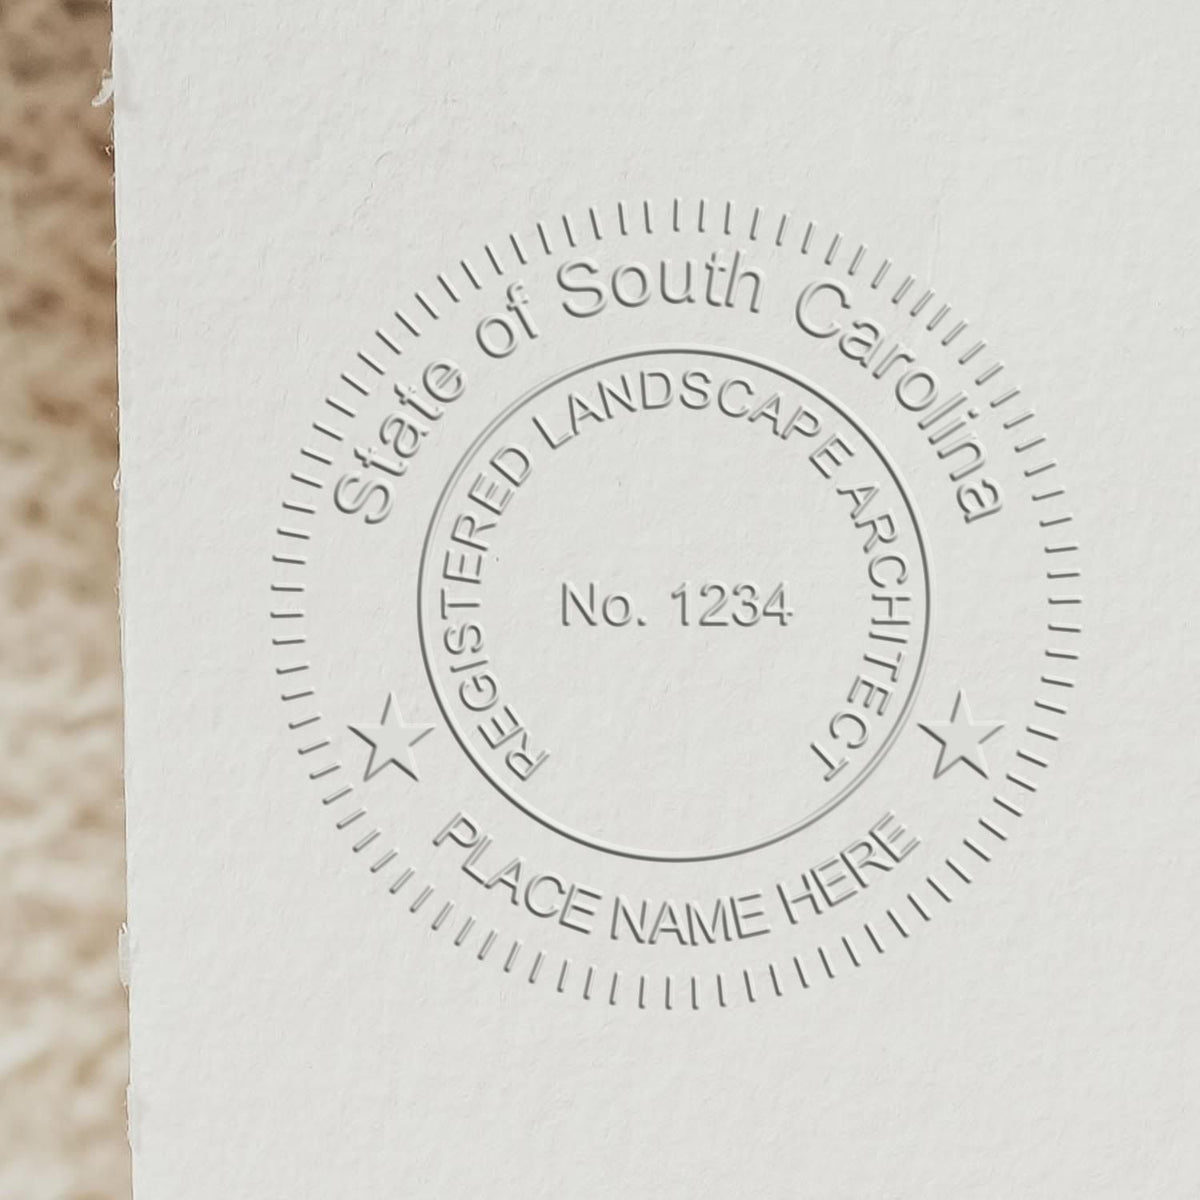 A stamped impression of the Soft Pocket South Carolina Landscape Architect Embosser in this stylish lifestyle photo, setting the tone for a unique and personalized product.